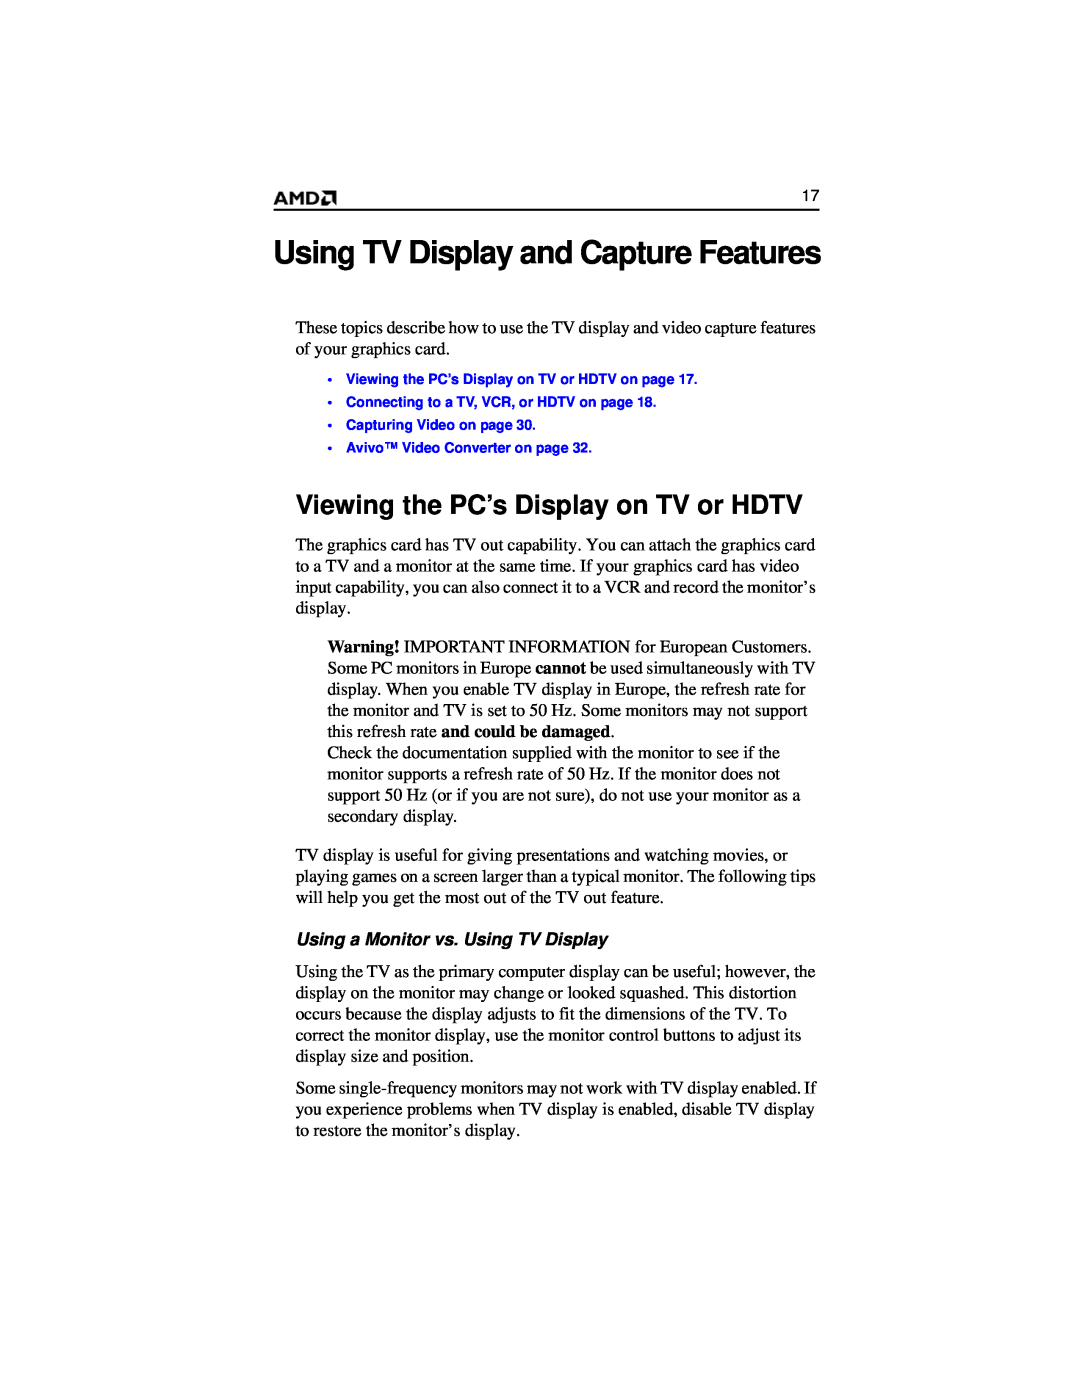 AMD HD 2400 manual Using TV Display and Capture Features, Viewing the PC’s Display on TV or HDTV 